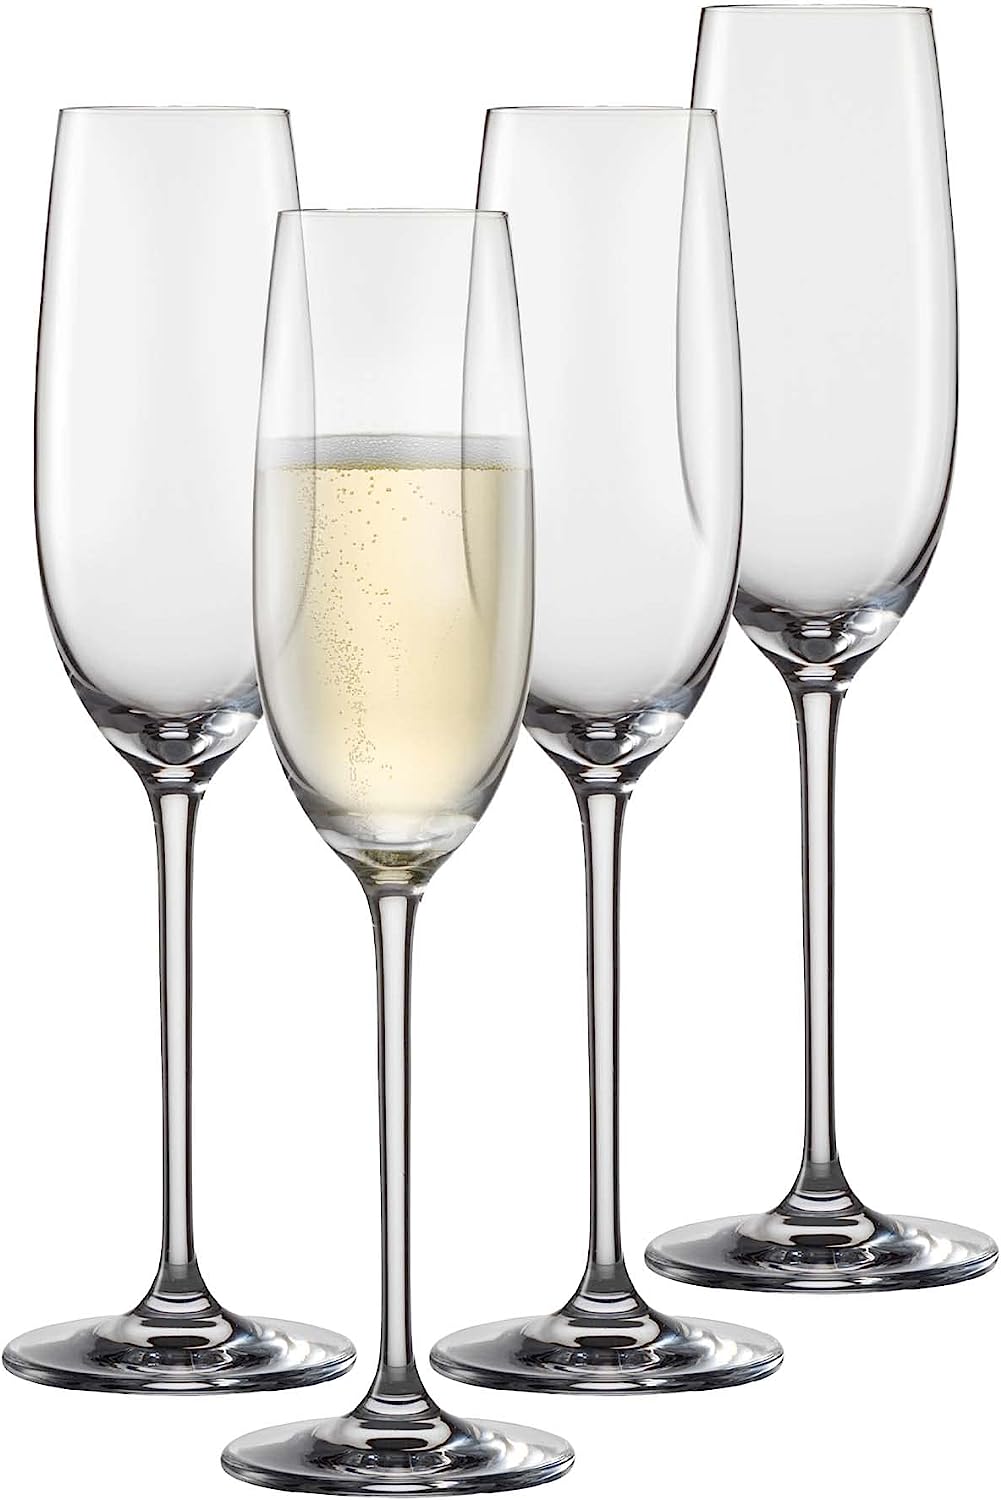 Schott Zwiesel Vinos Champagne Flutes (Set of 4), Graceful Champagne Glasses with Moussing Point, Dishwasher-Safe Tritan Crystal Glasses, Made in Germany (Item No. 130010)